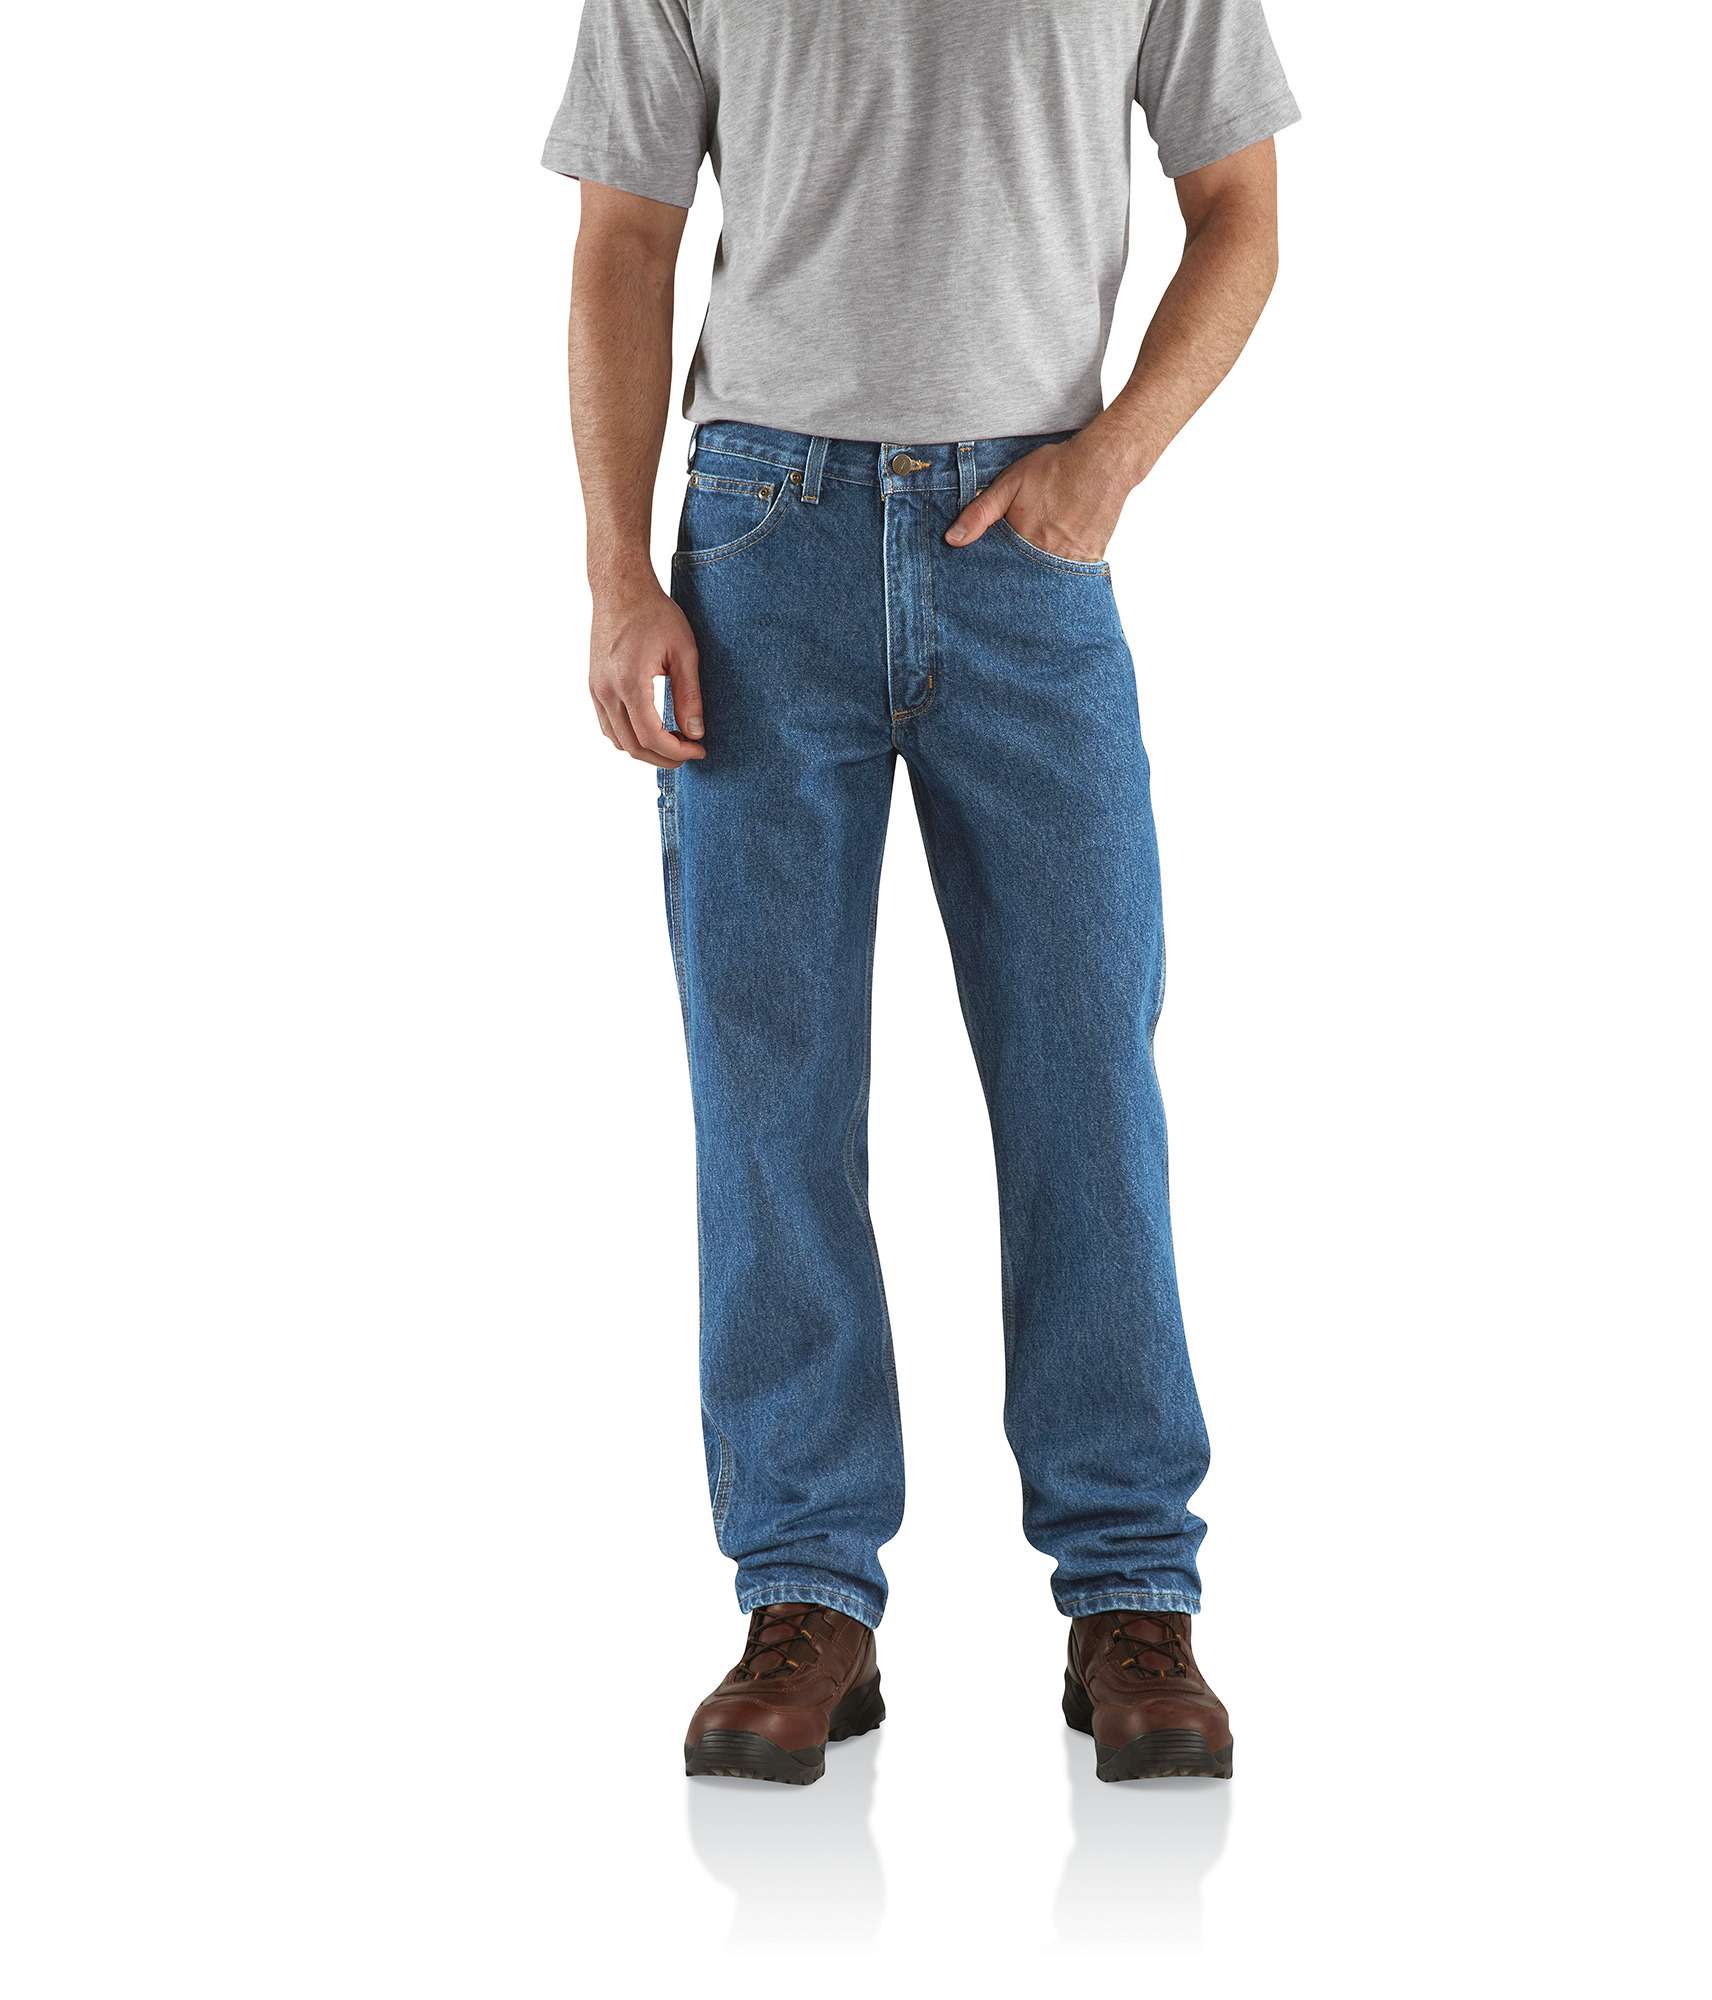 Relaxed Fit Carpenter Jean | Carhartt Reworked